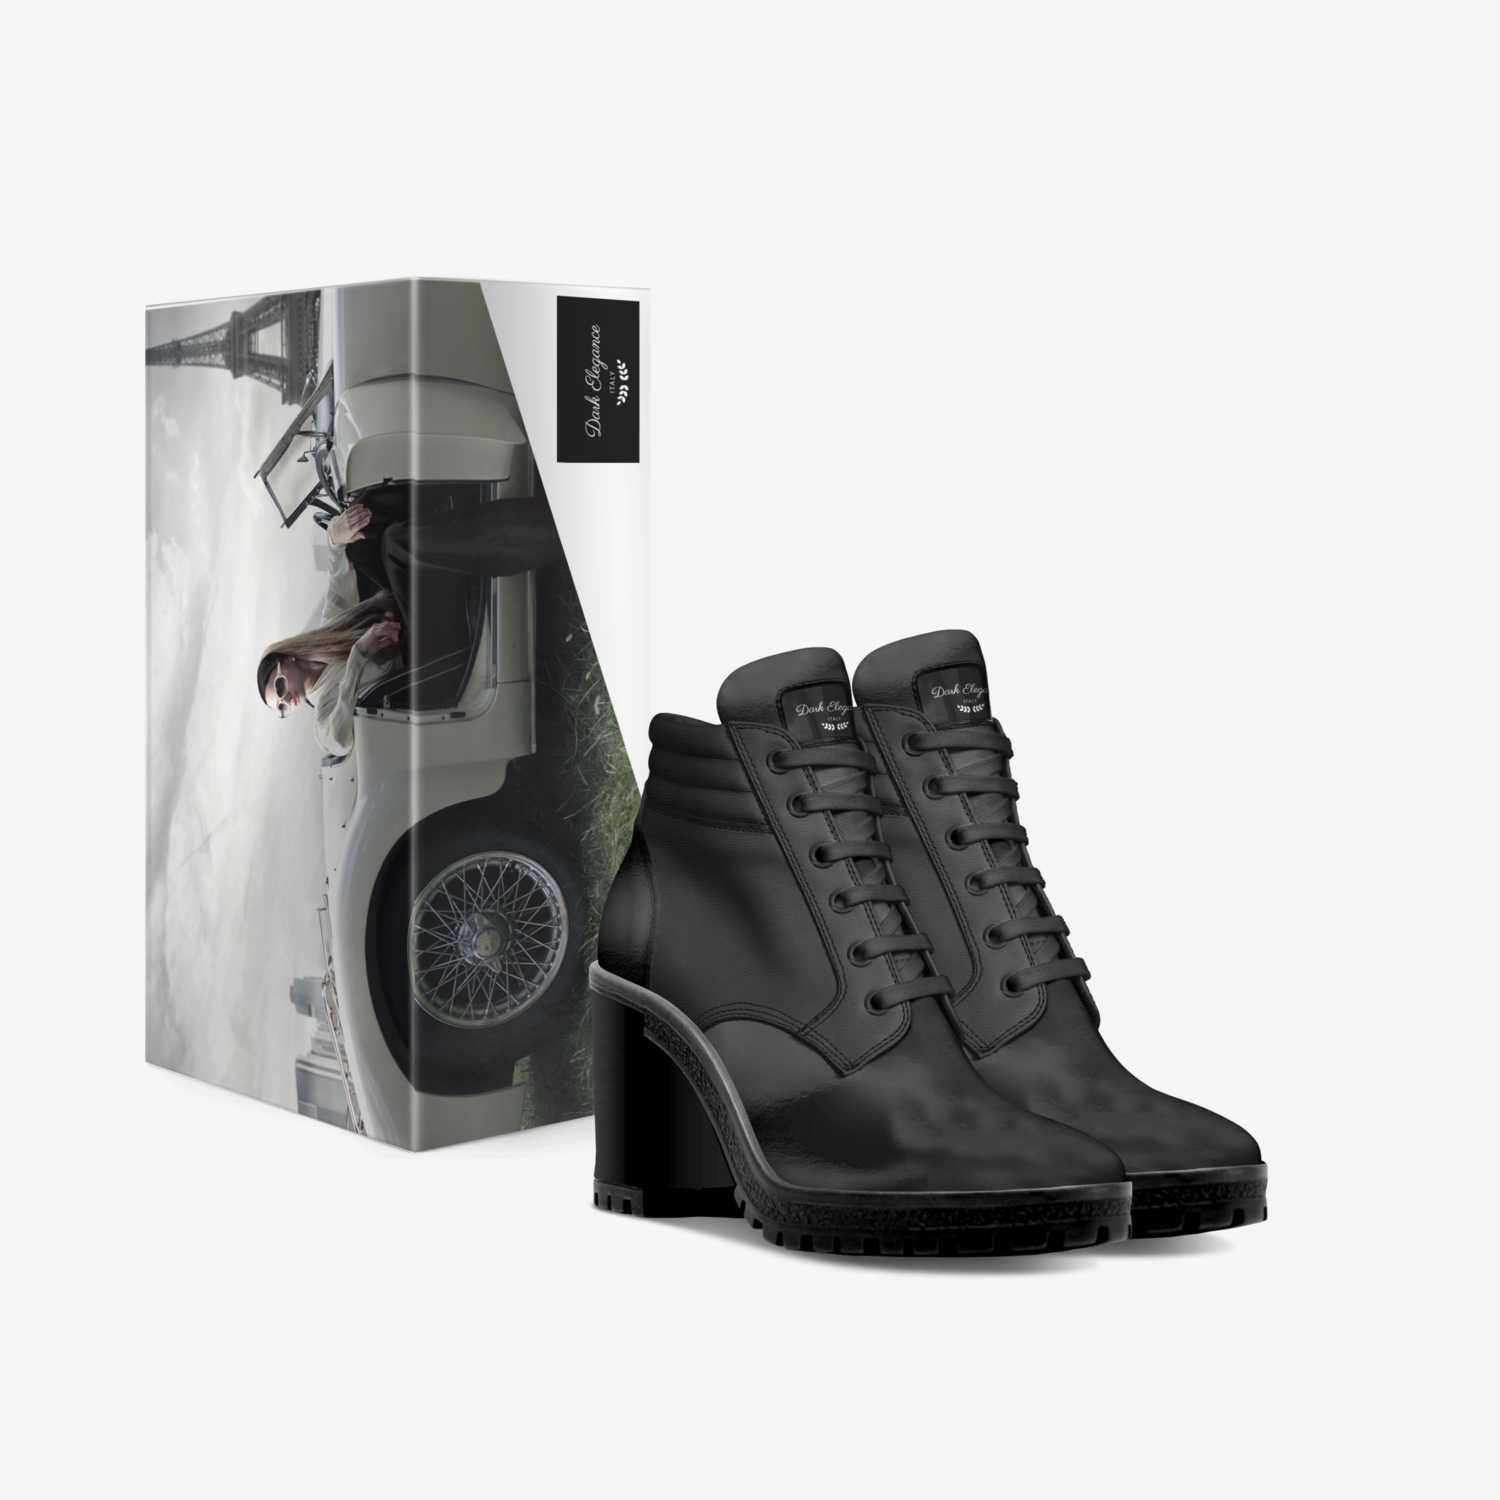 Dark Elegance custom made in Italy shoes by William Ross | Box view